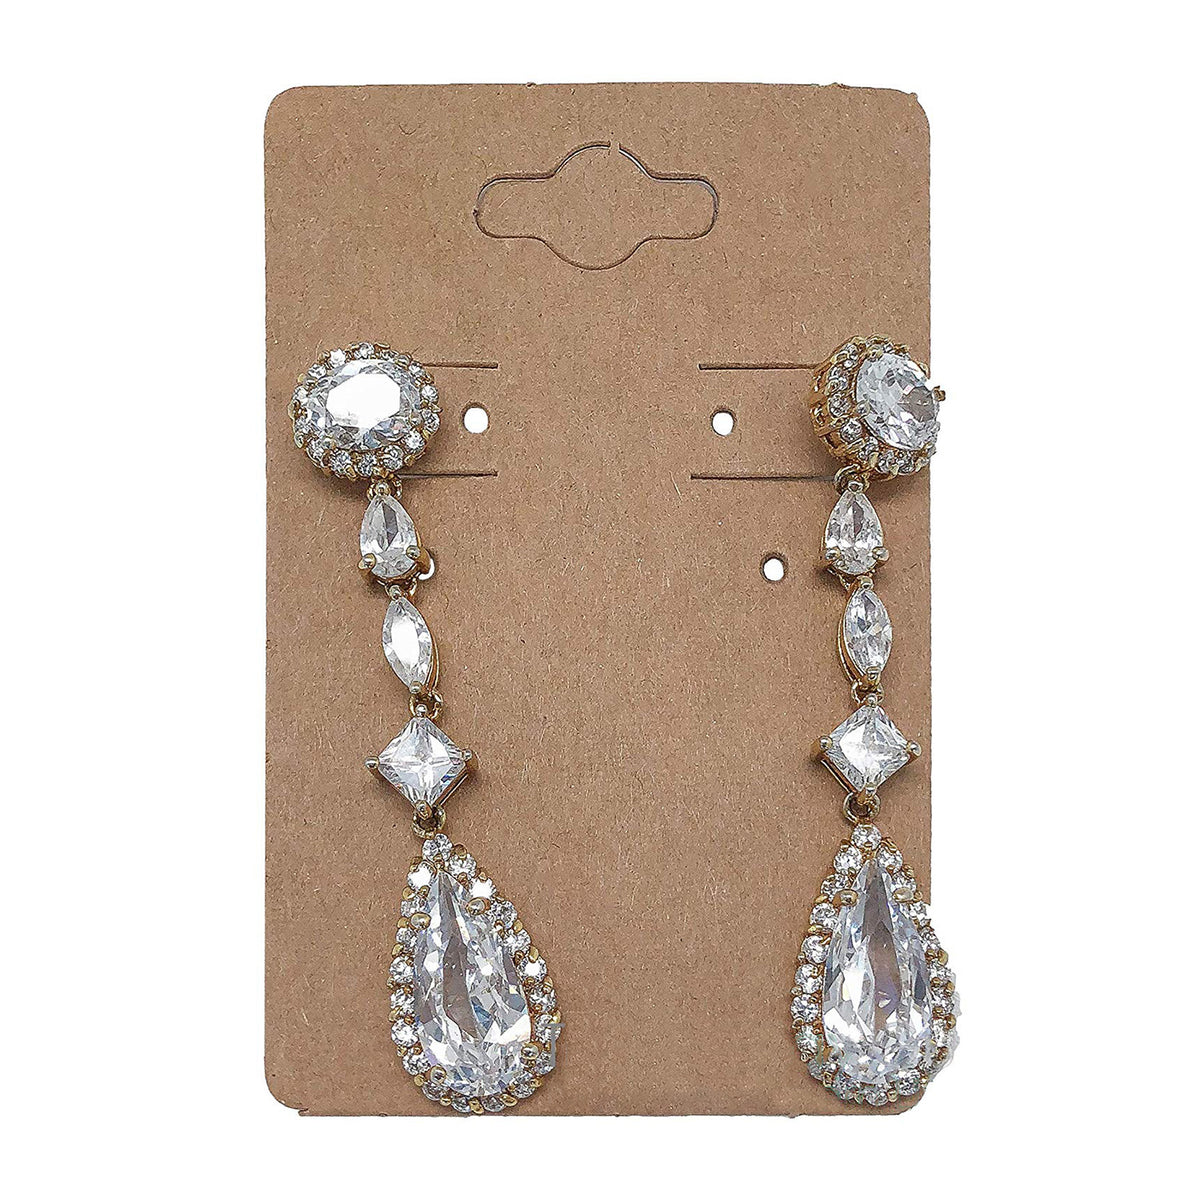 72 Earring Cards 2 X 3, Custom Earring Cards, Personalized Rectangle  Earring Display Cards, Jewelry Cards, SH0012-03-E 